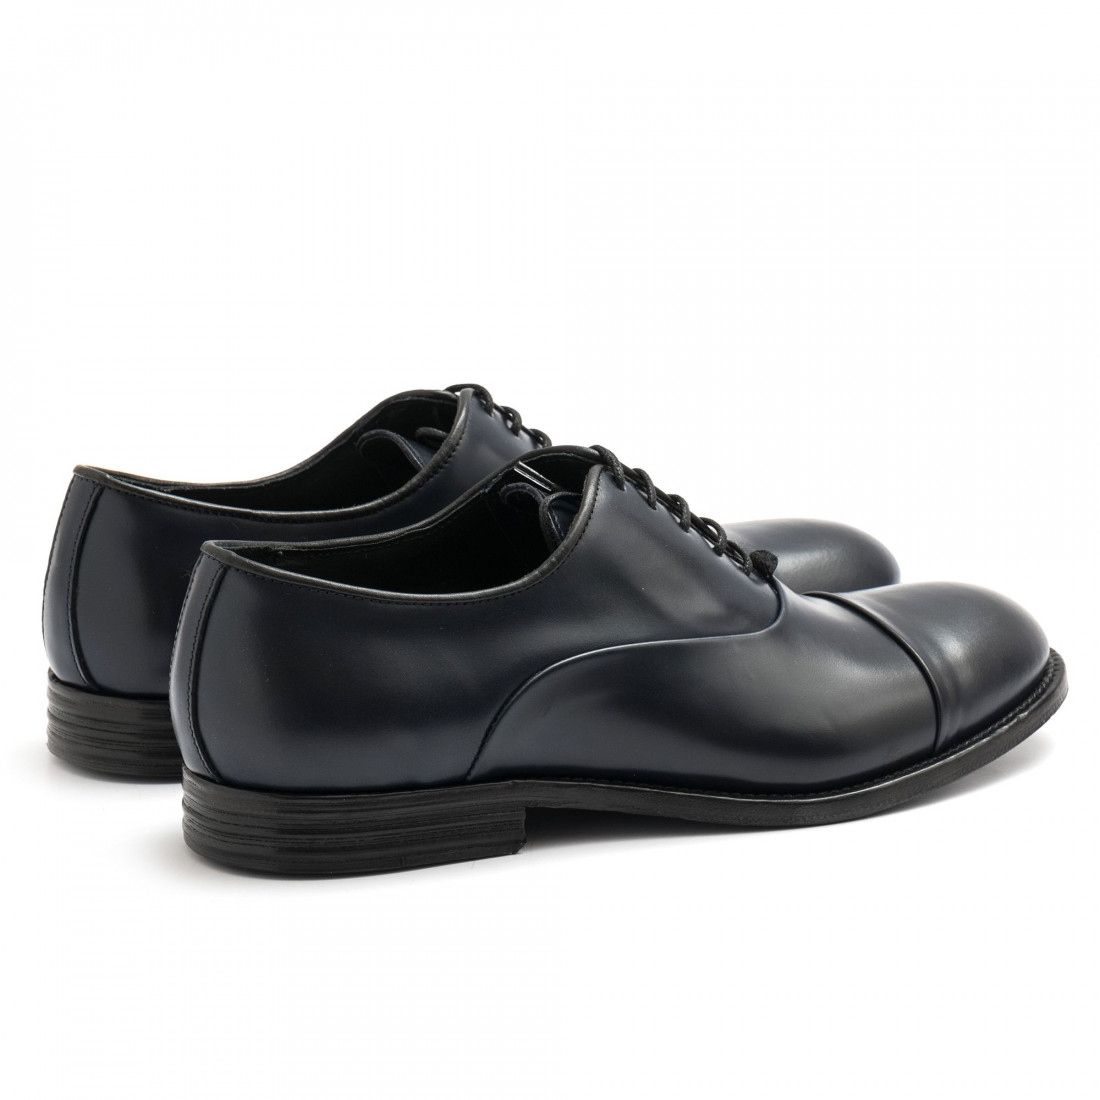 Blue brused leather Pawelk's oxford shoes